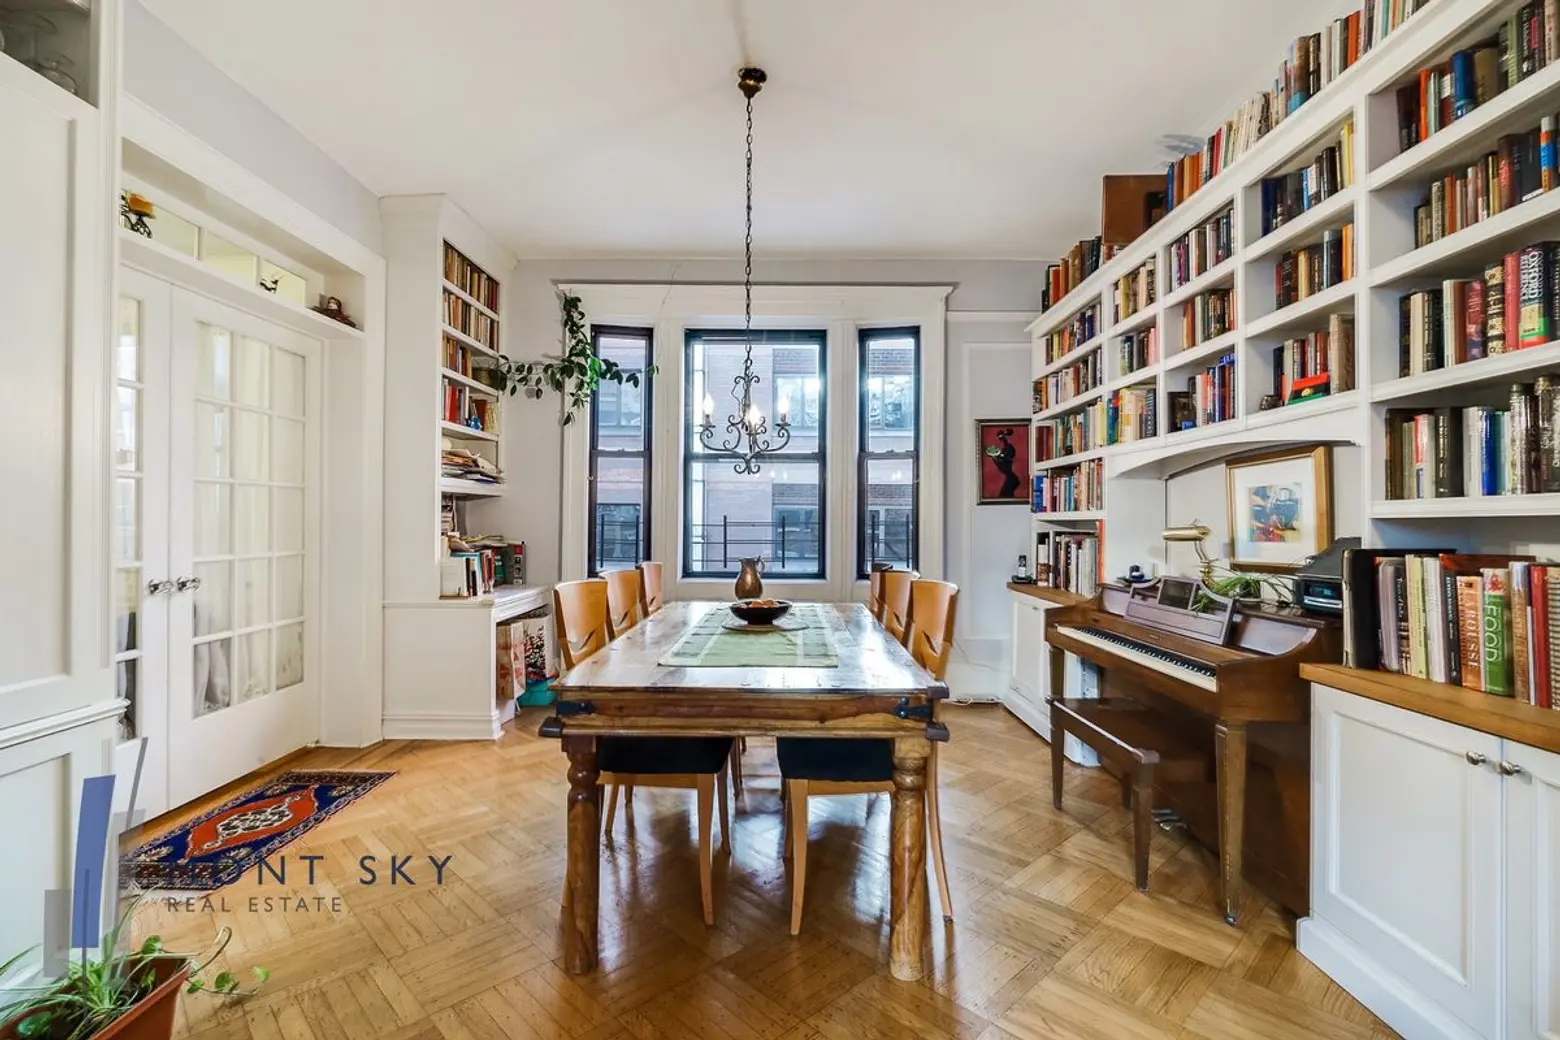 Book lovers will swoon over this $915K prewar Morningside Heights co-op